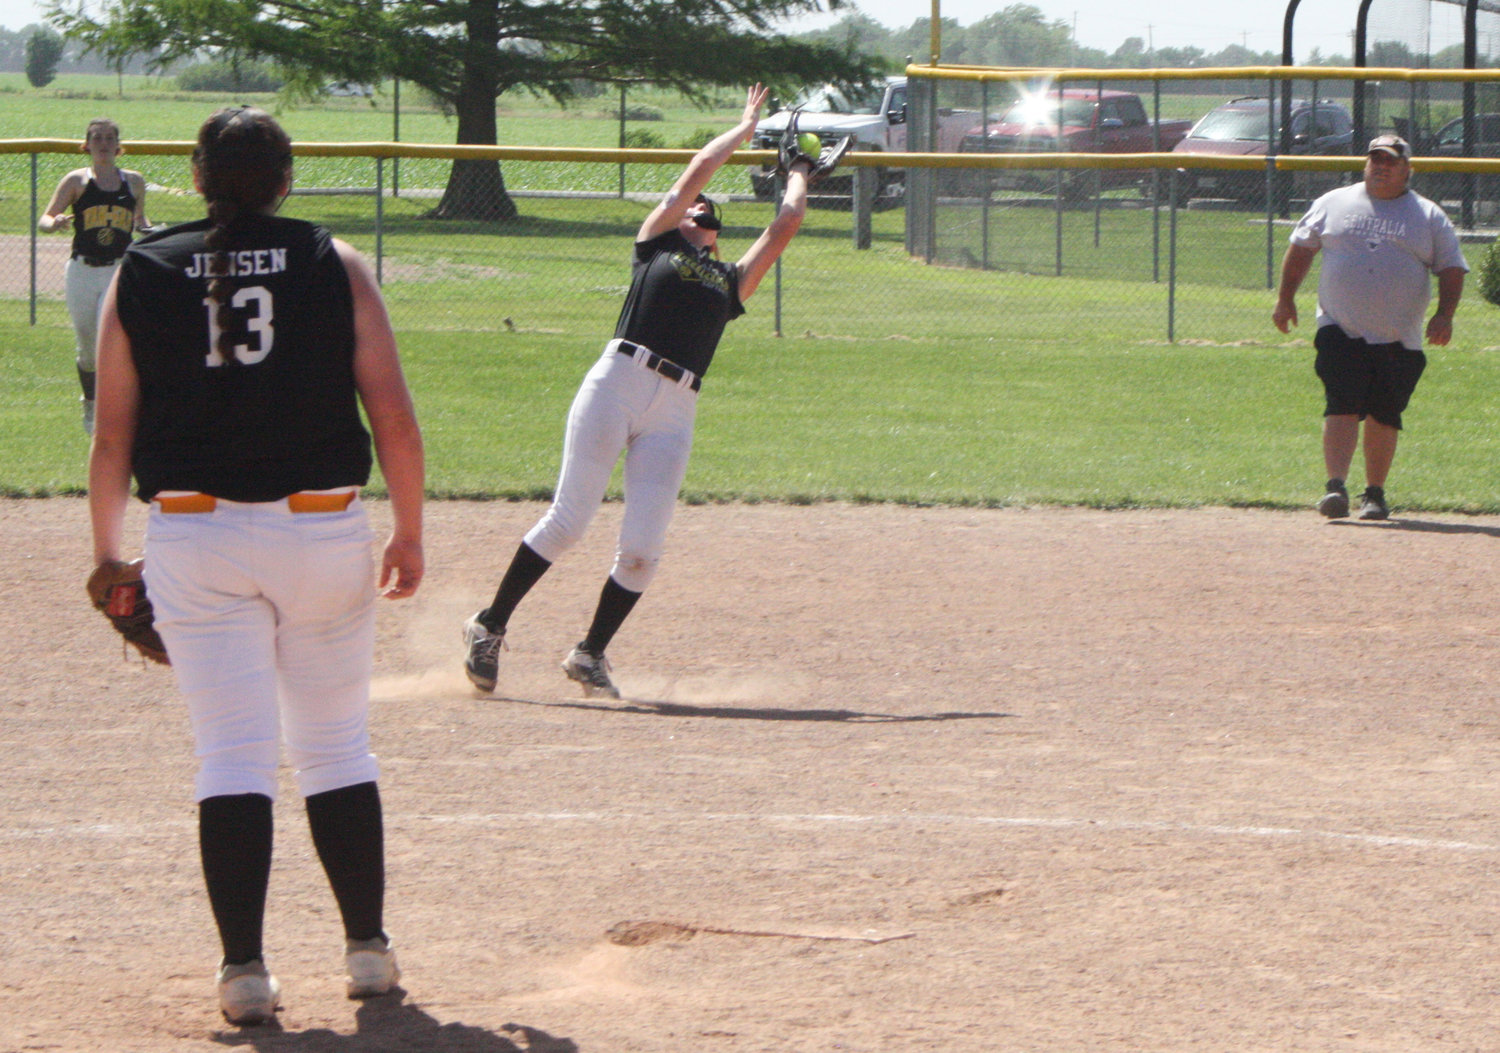 Van-Far's Madelyn Caldwell reaches out June 14 for a catch in a summer league game the Lady Indians played in Centralia.